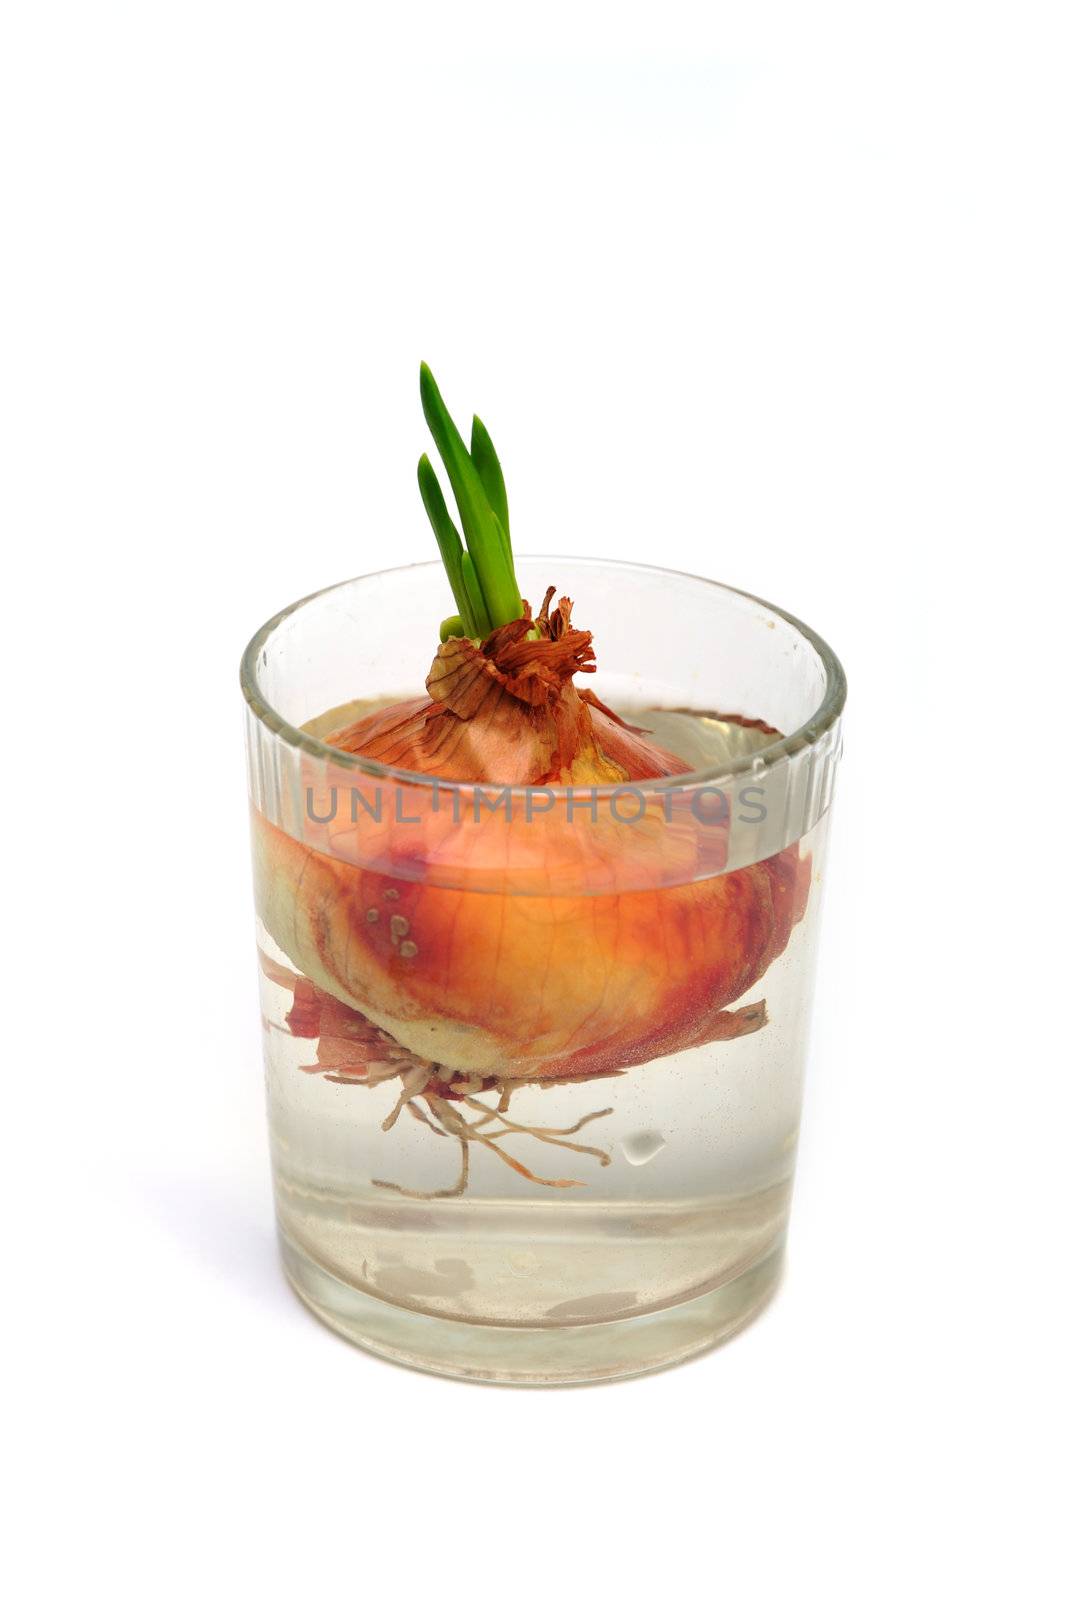 An image of a bulb of onion in a glass with water